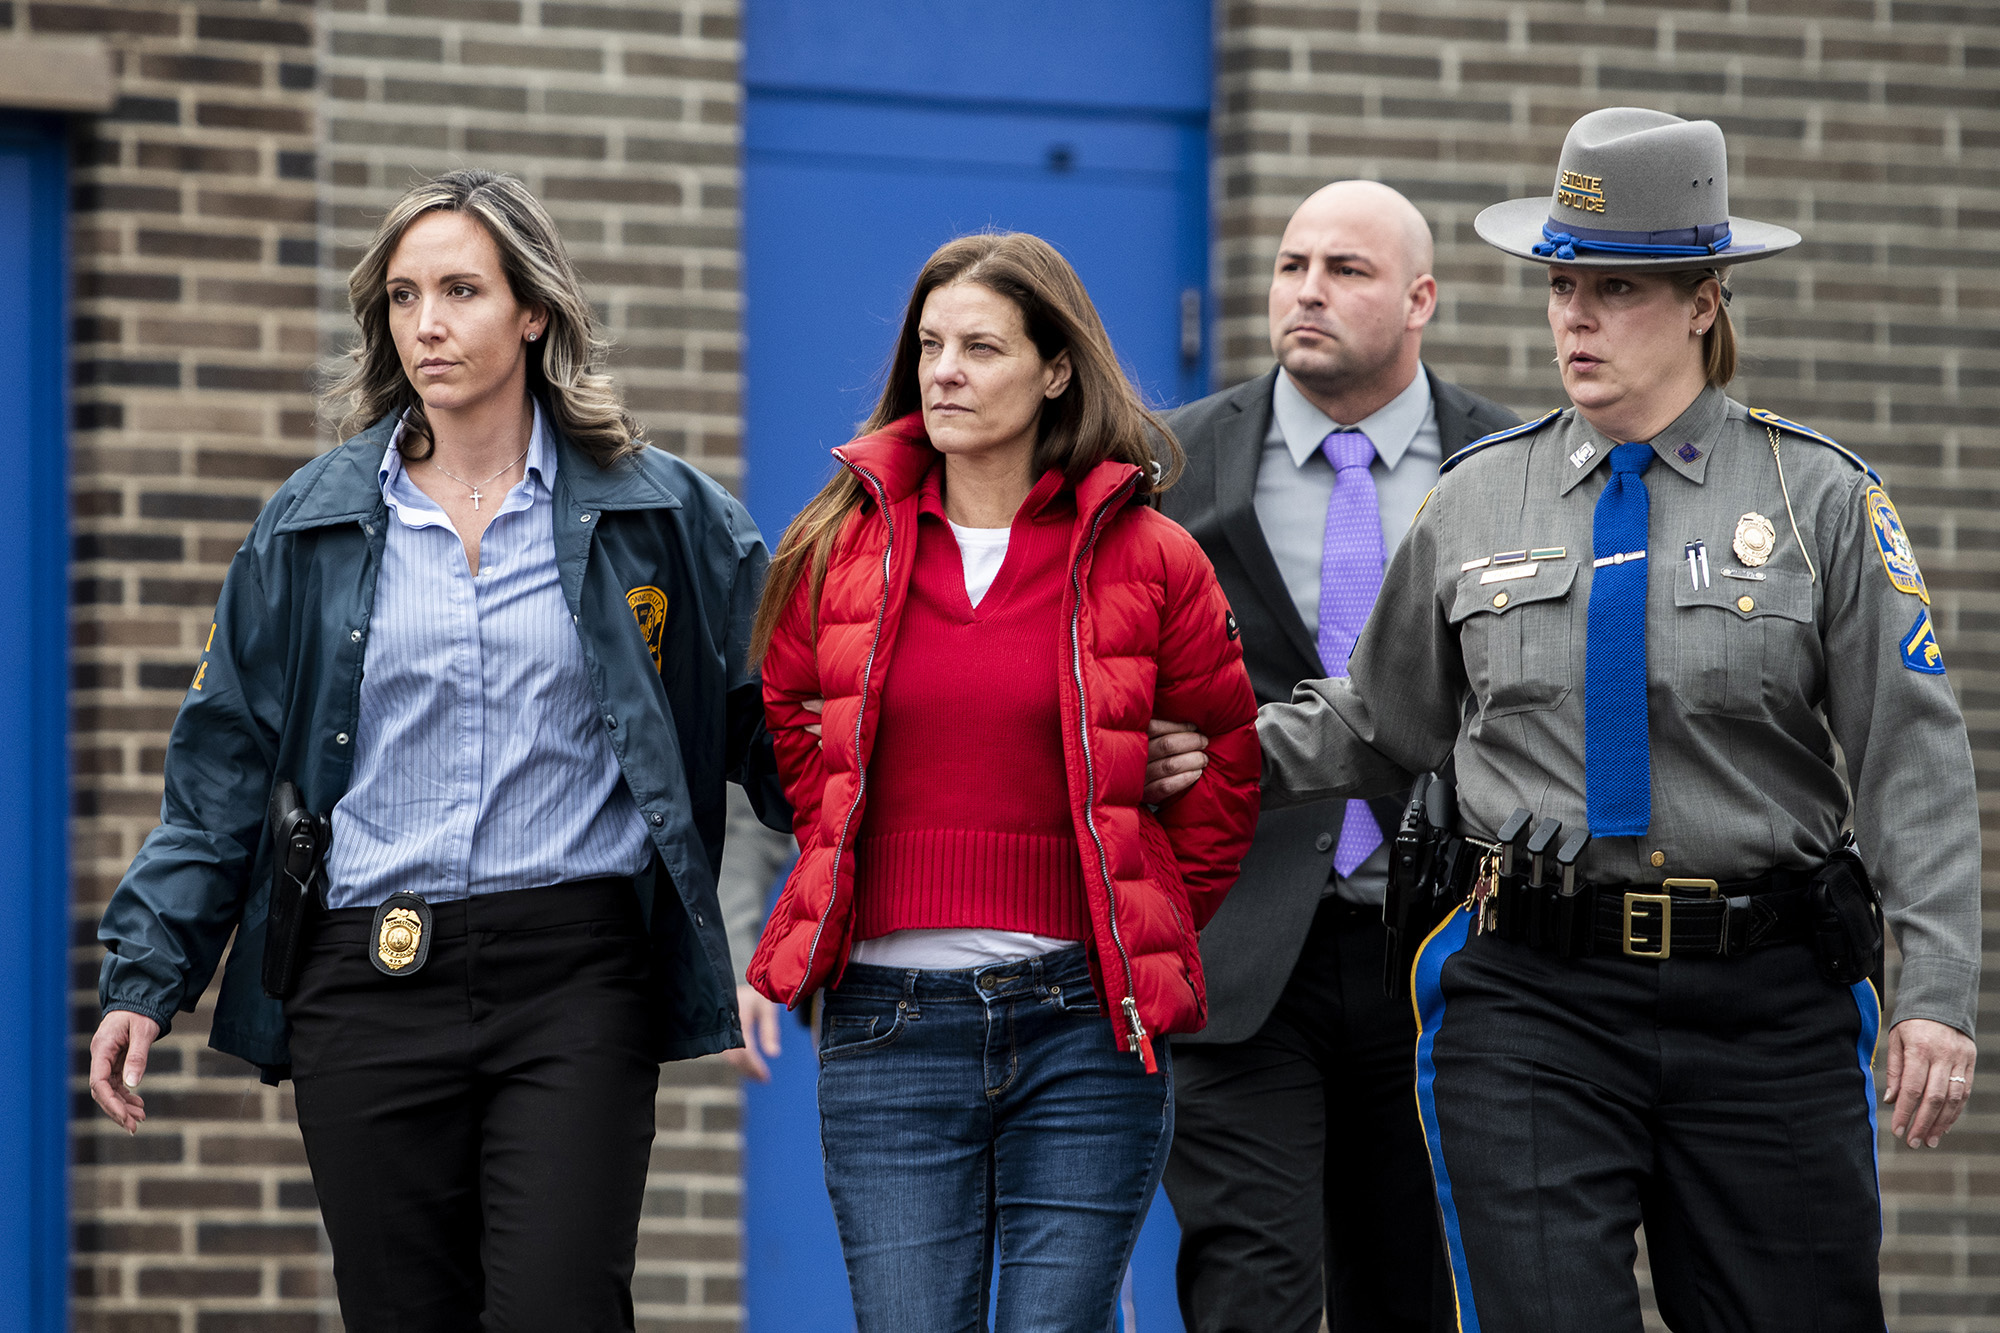 PHOTO: Michelle Troconis is escorted out of the Troop G State Police station before being placed into a cruiser, Jan. 7, 2020.